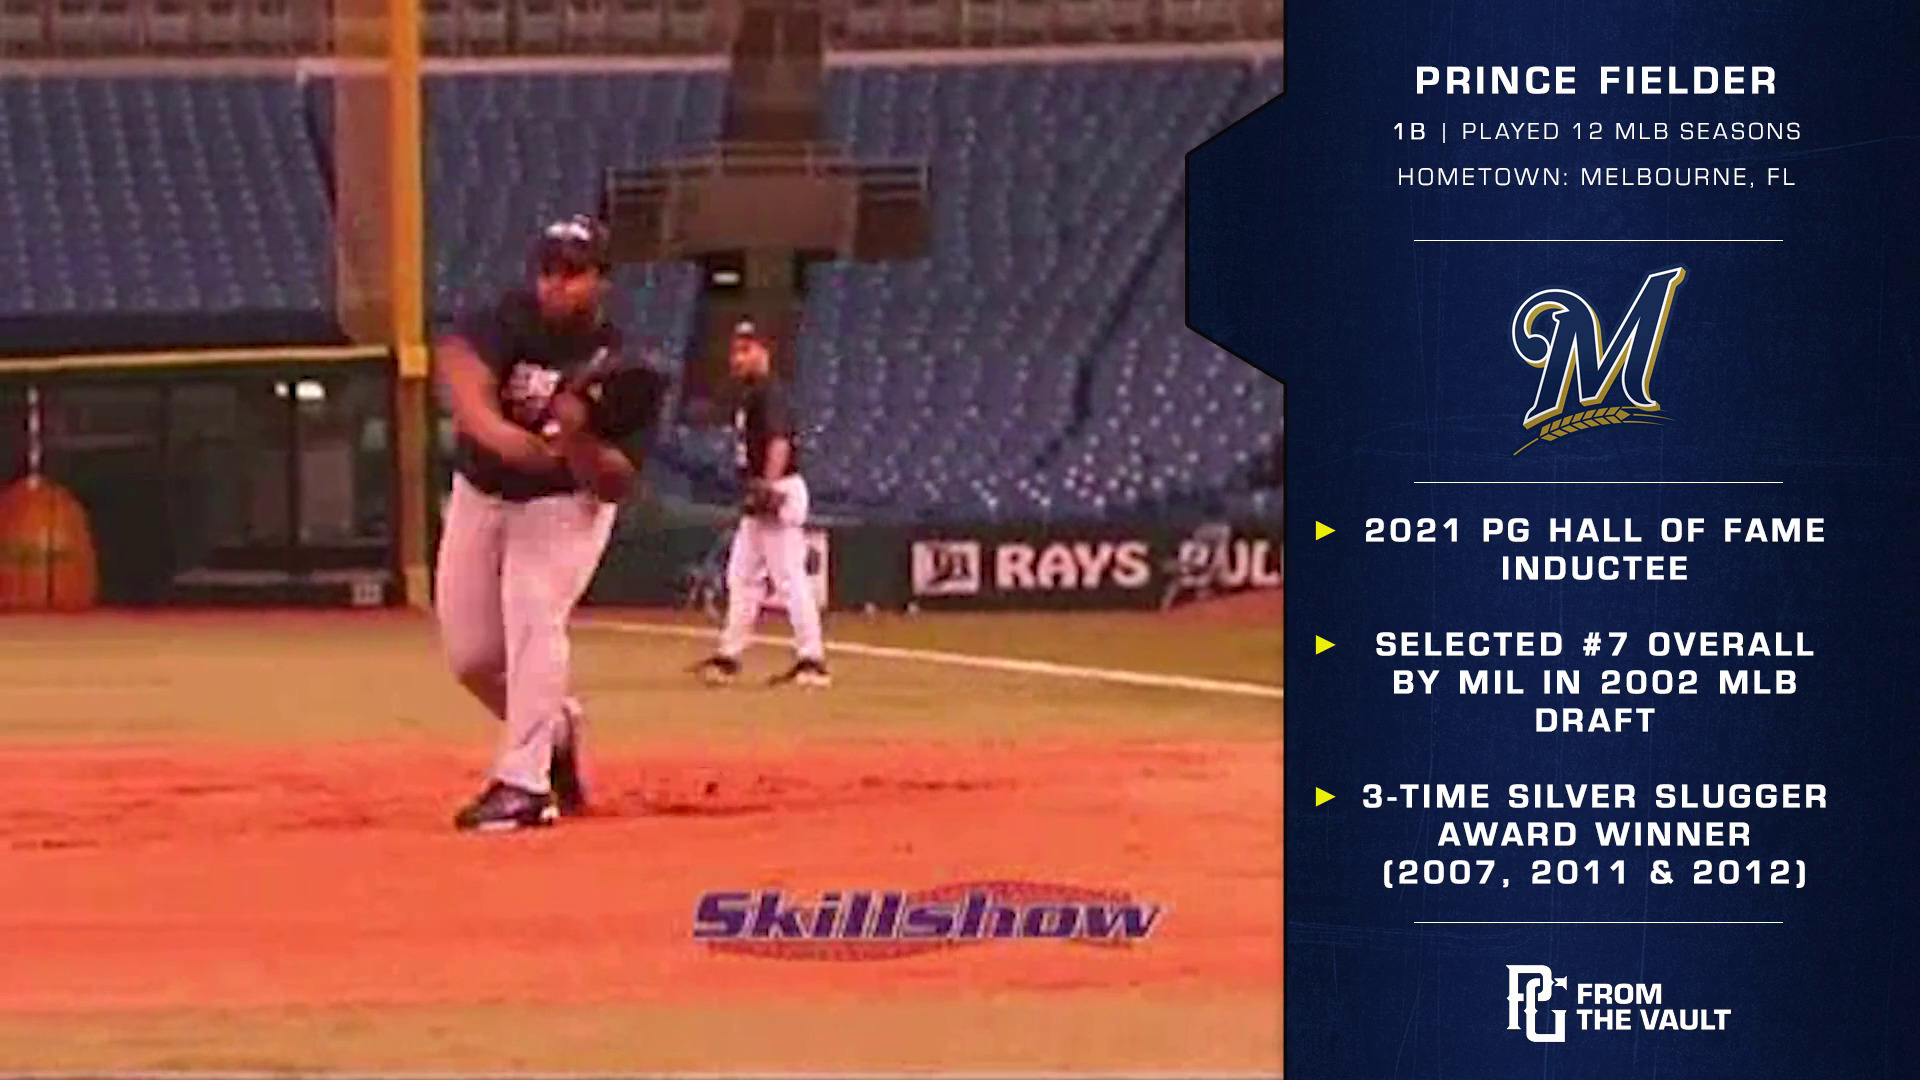 From The Vault: Prince Fielder